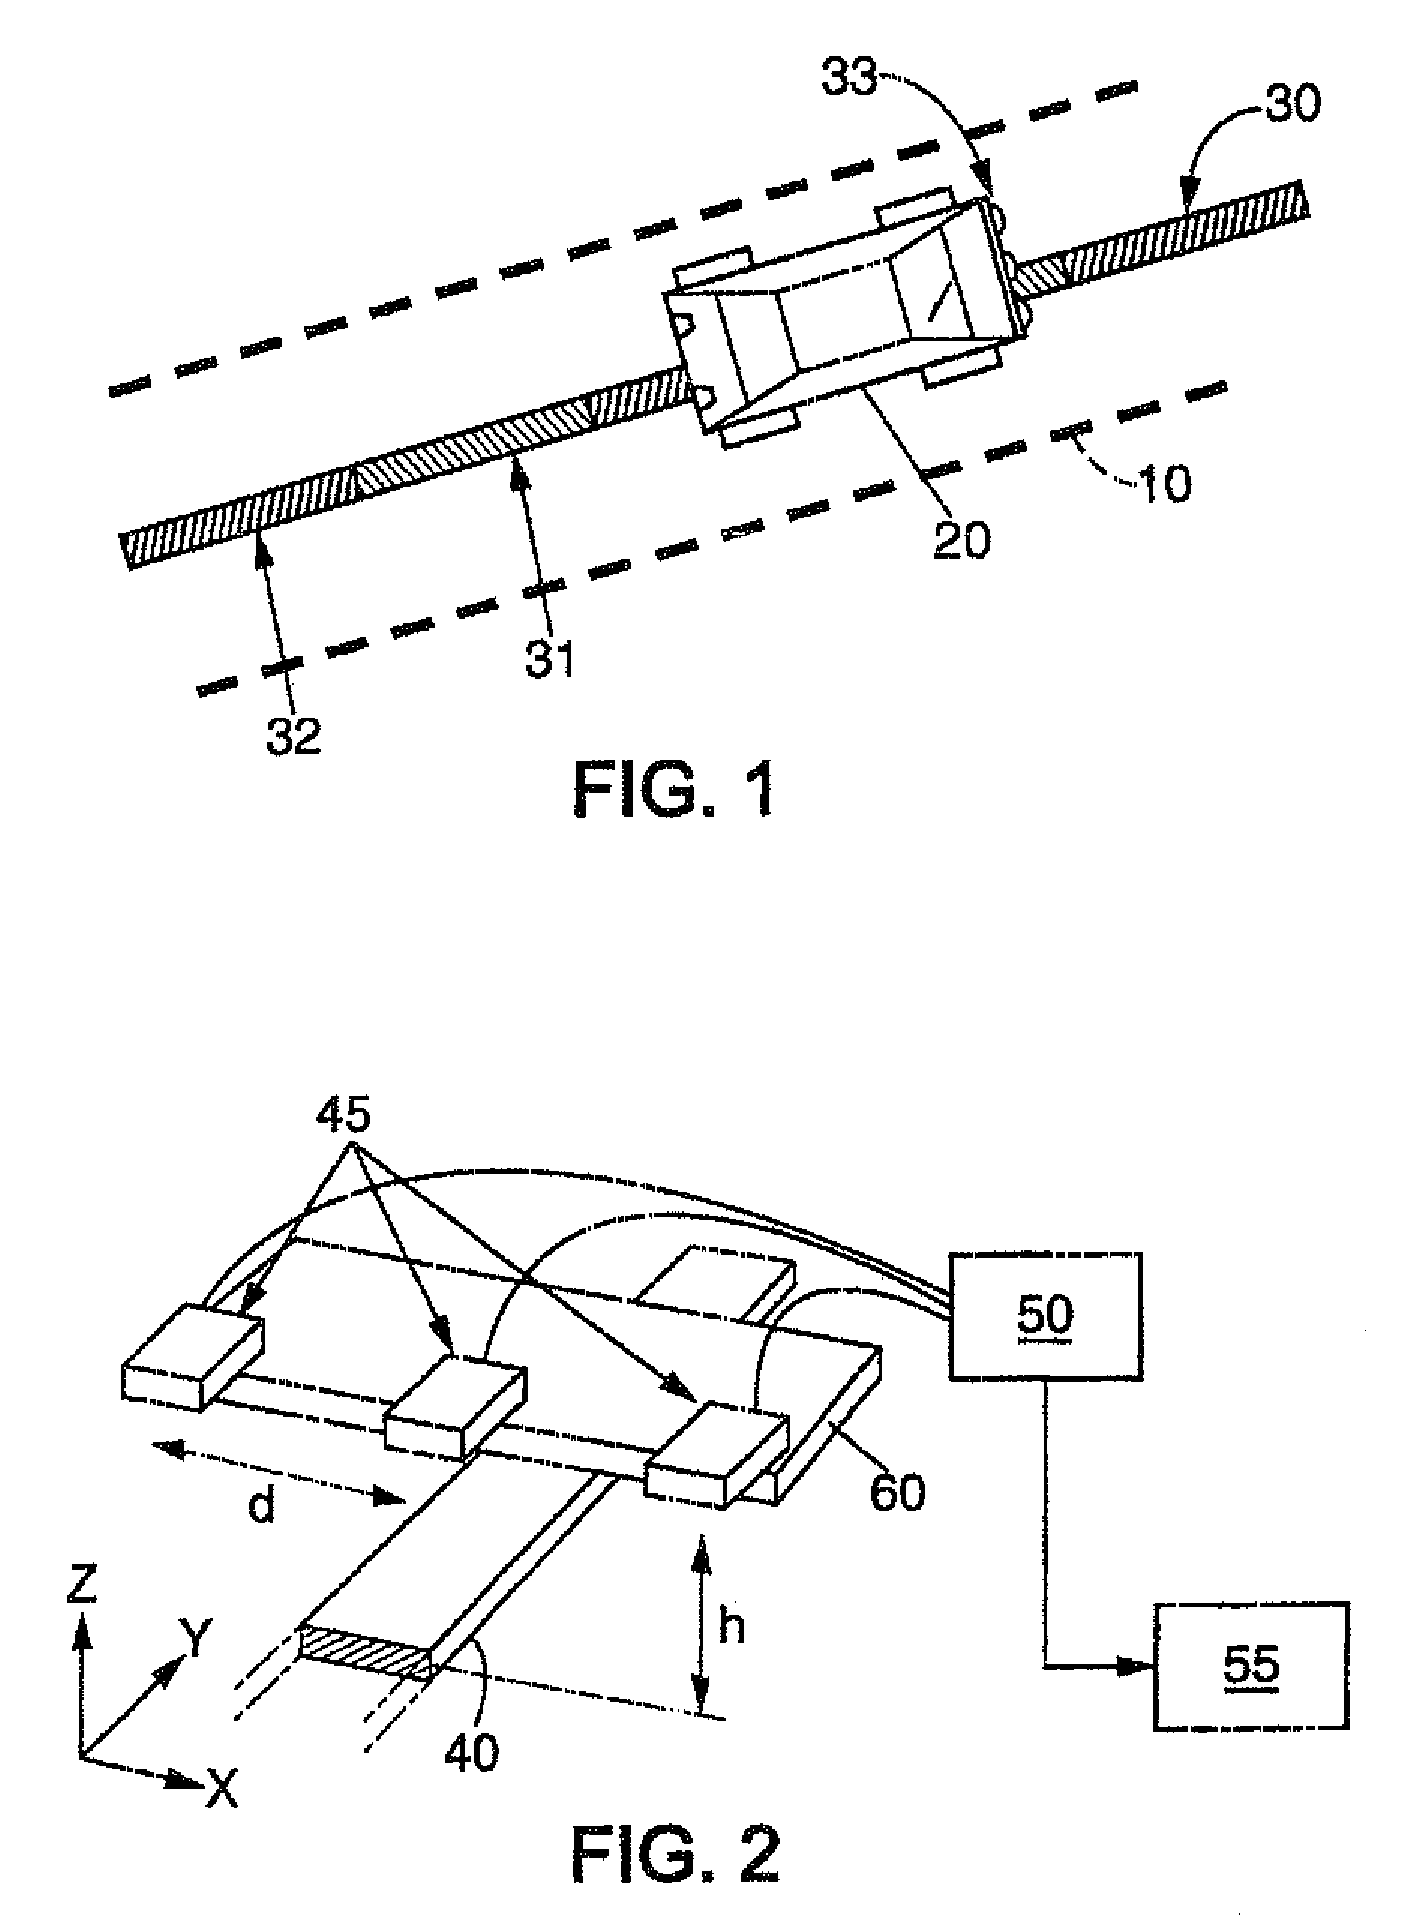 Driving assistance system for interaction between a mobile element and an infrastructure